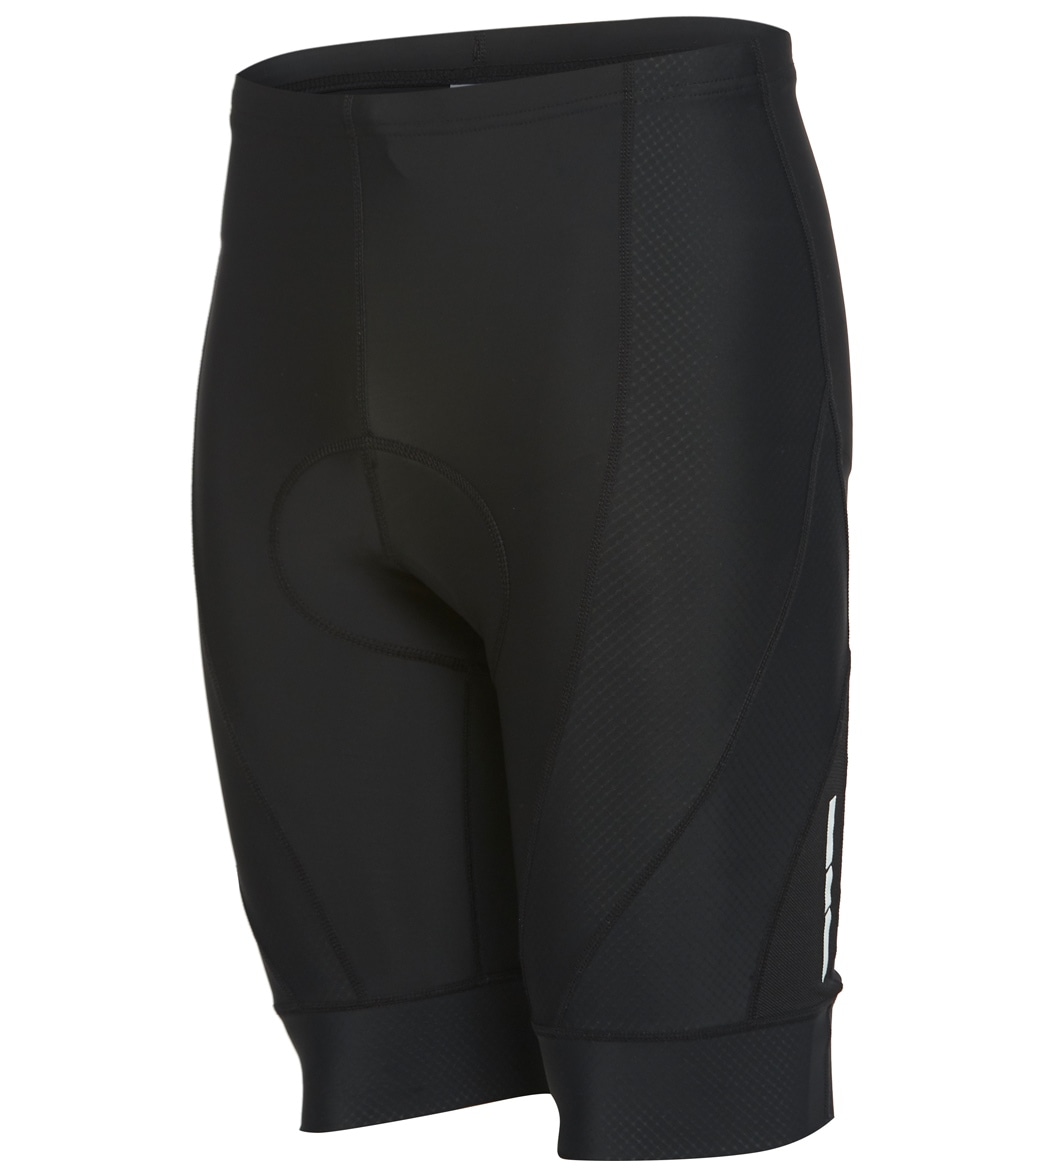 cycling shorts next day delivery